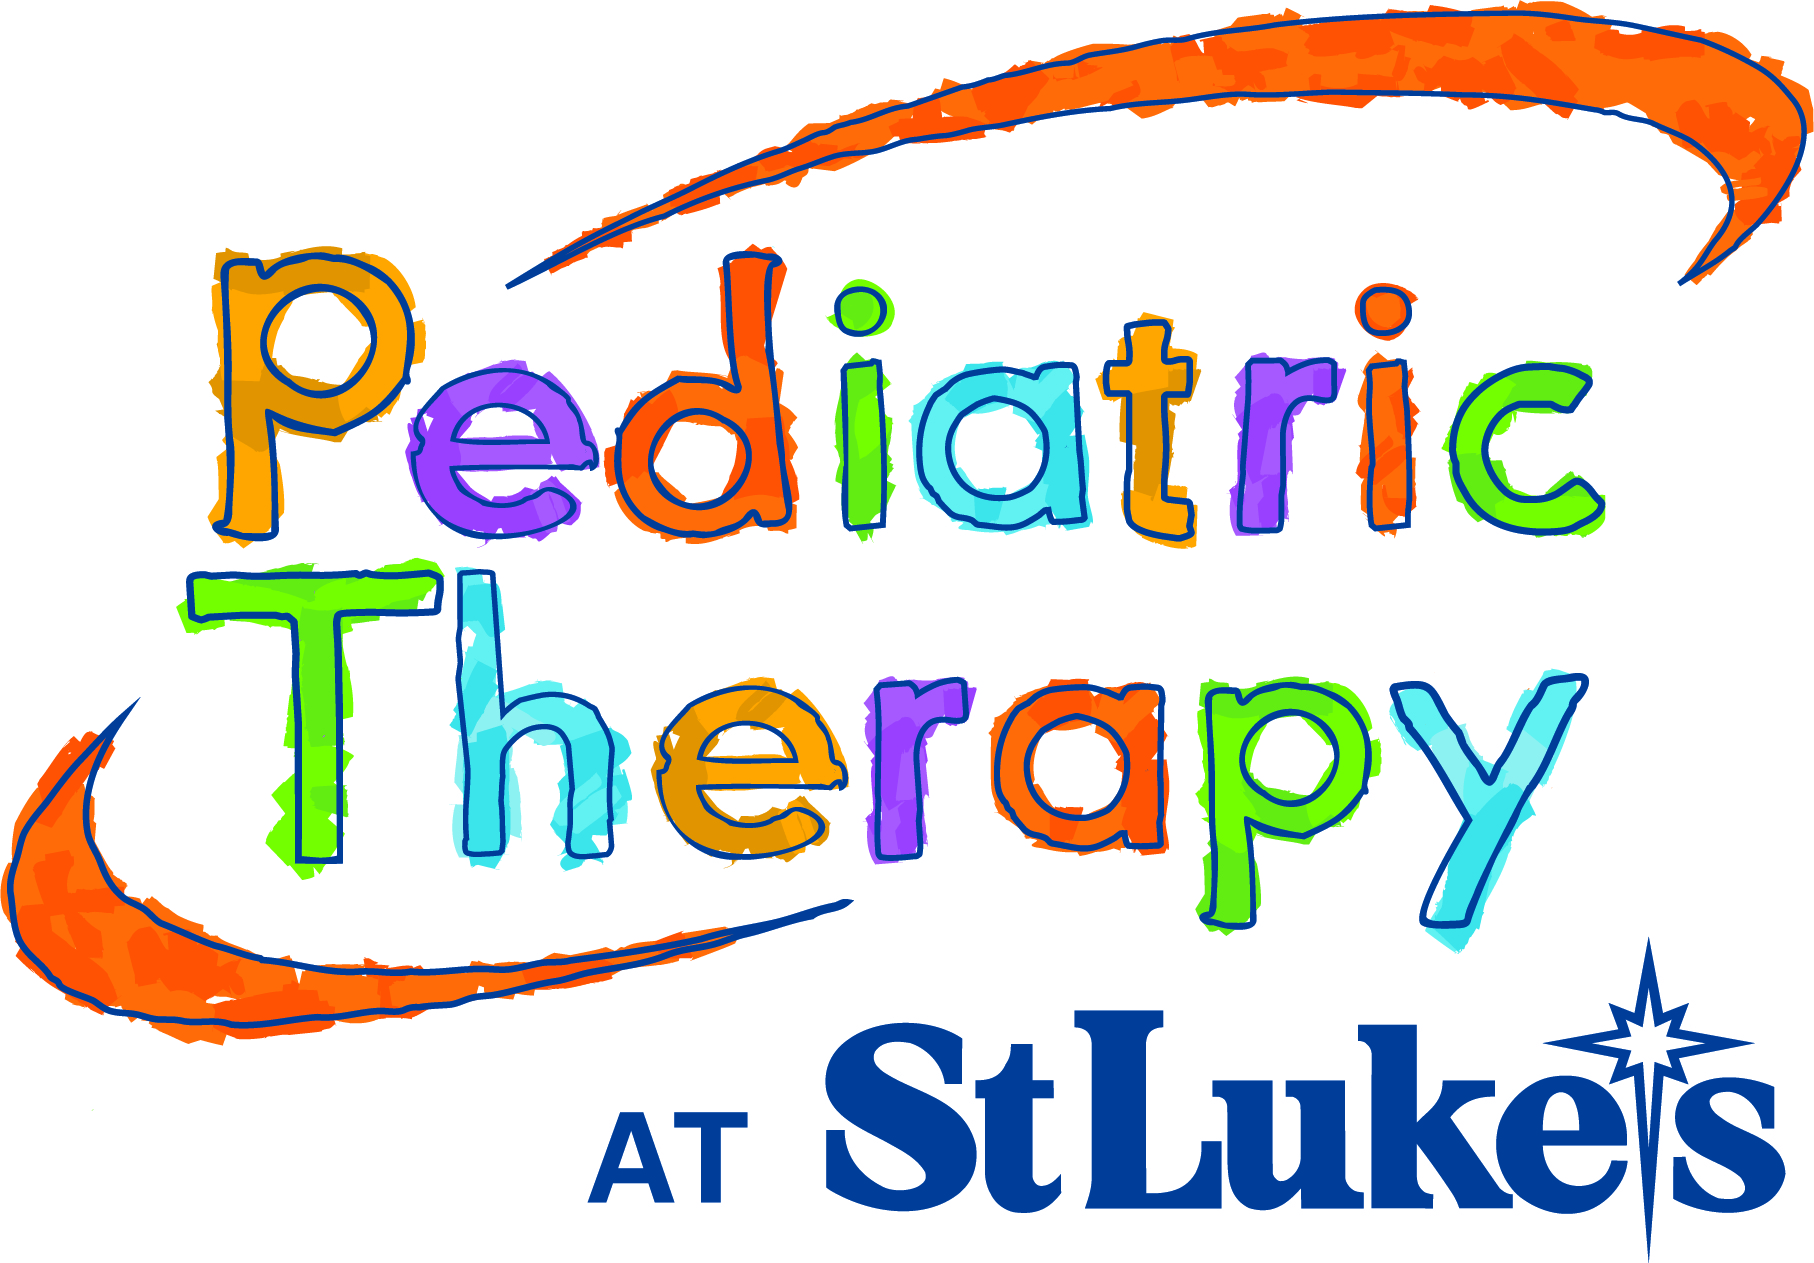 *Service Provider Sponsors* [St. Luke's Physical Therapy]